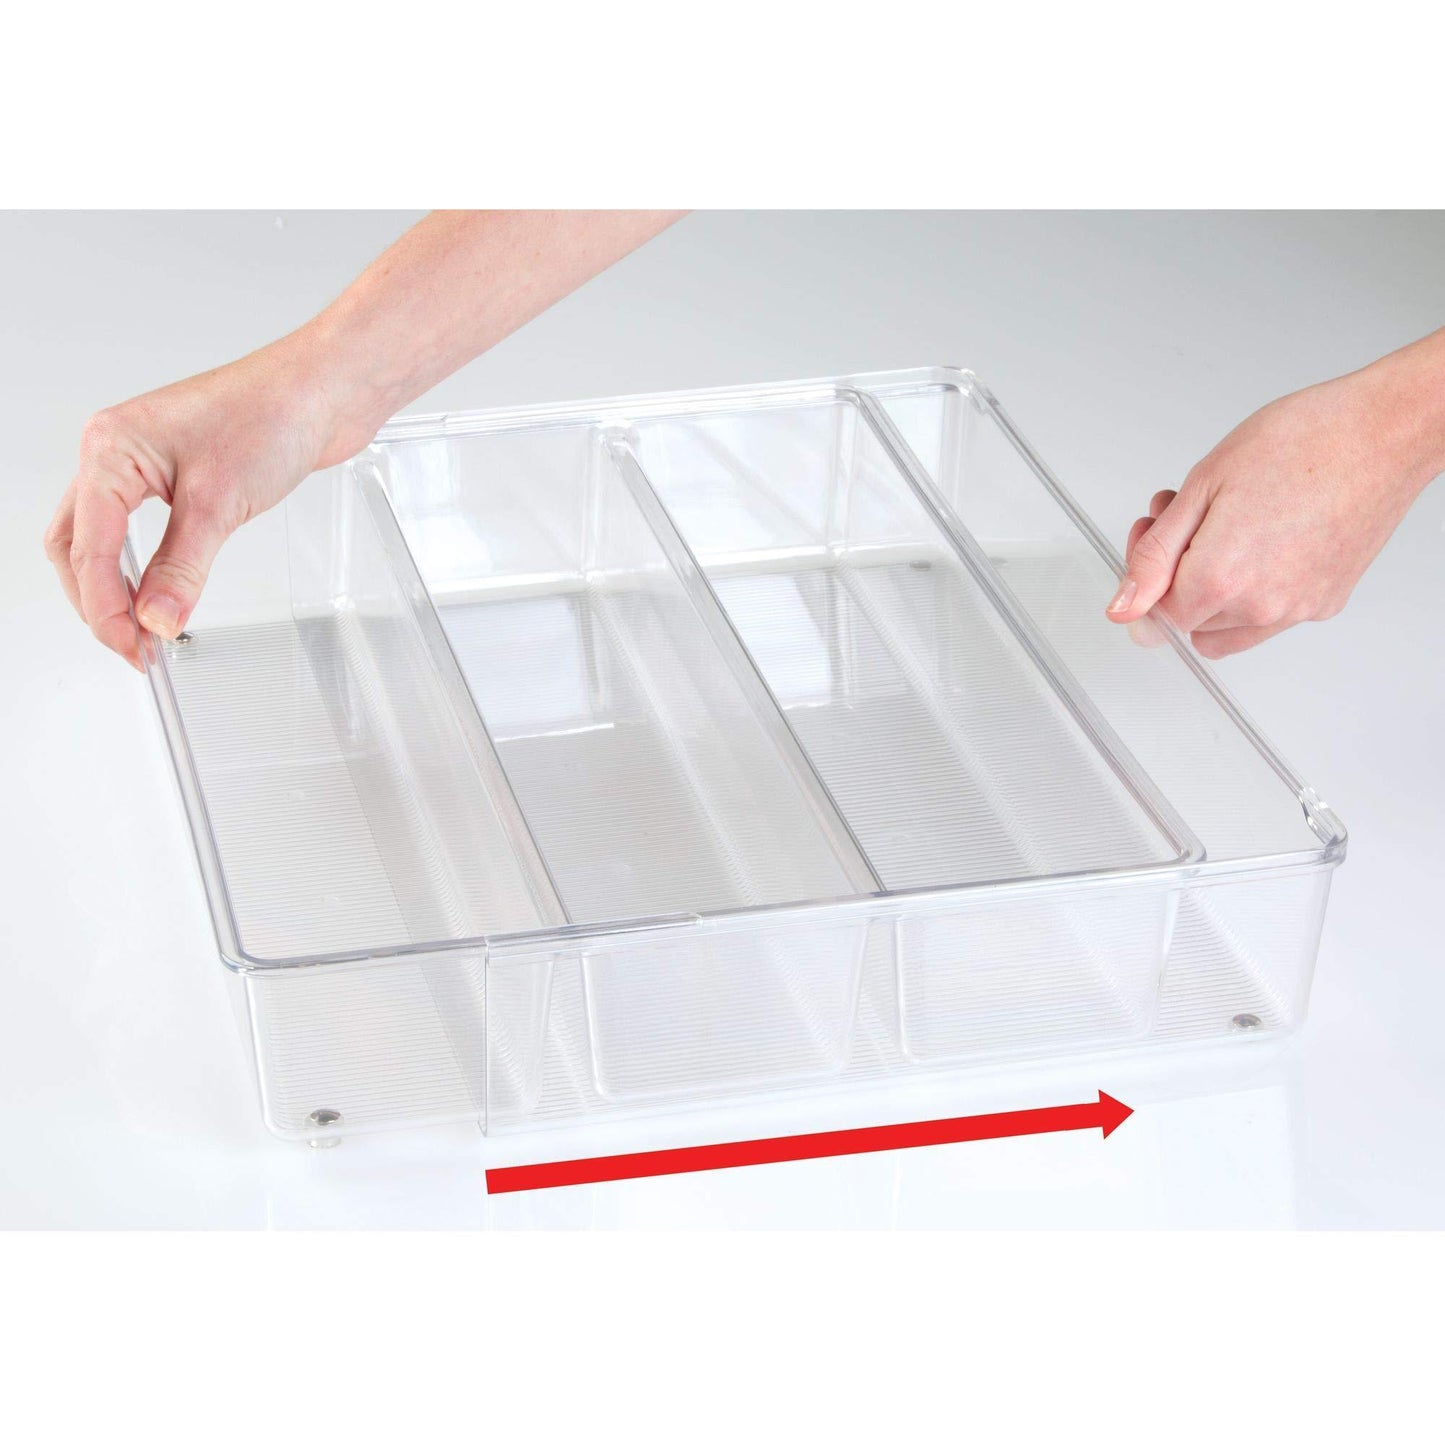 best adjustable expandable 4 compartment kitchen cabinet drawer organizer tray divided sections for cutlery serving cooking utensils gadgets bpa free food safe 3 deep pack of 2 clear